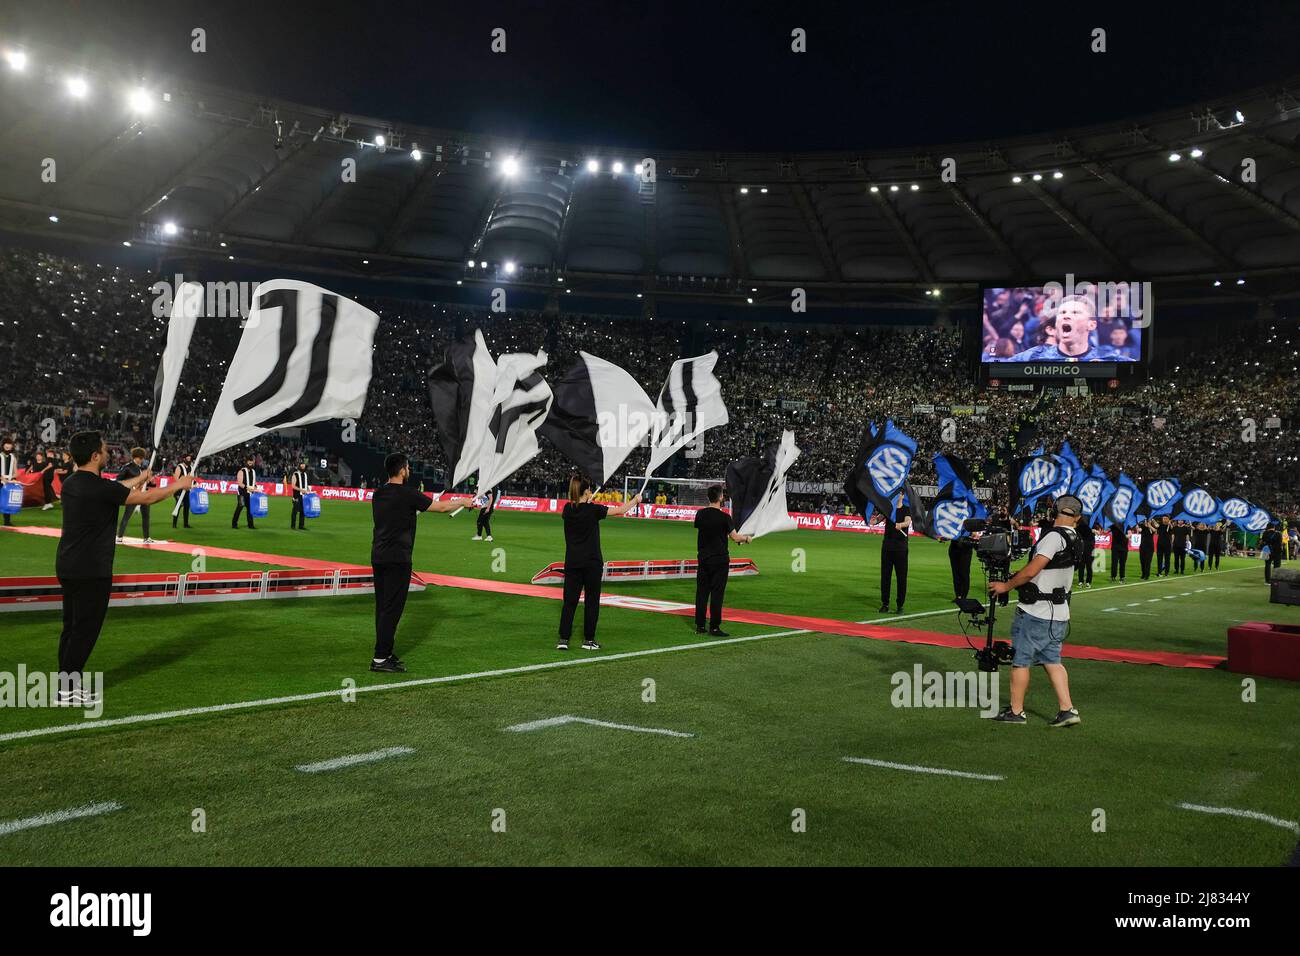 Opening choreography during the Coppa Italia final between Juventus Vs Inter at the Olimpico Stadium Rome, centre Italy, on May 11, 2022. Stock Photo